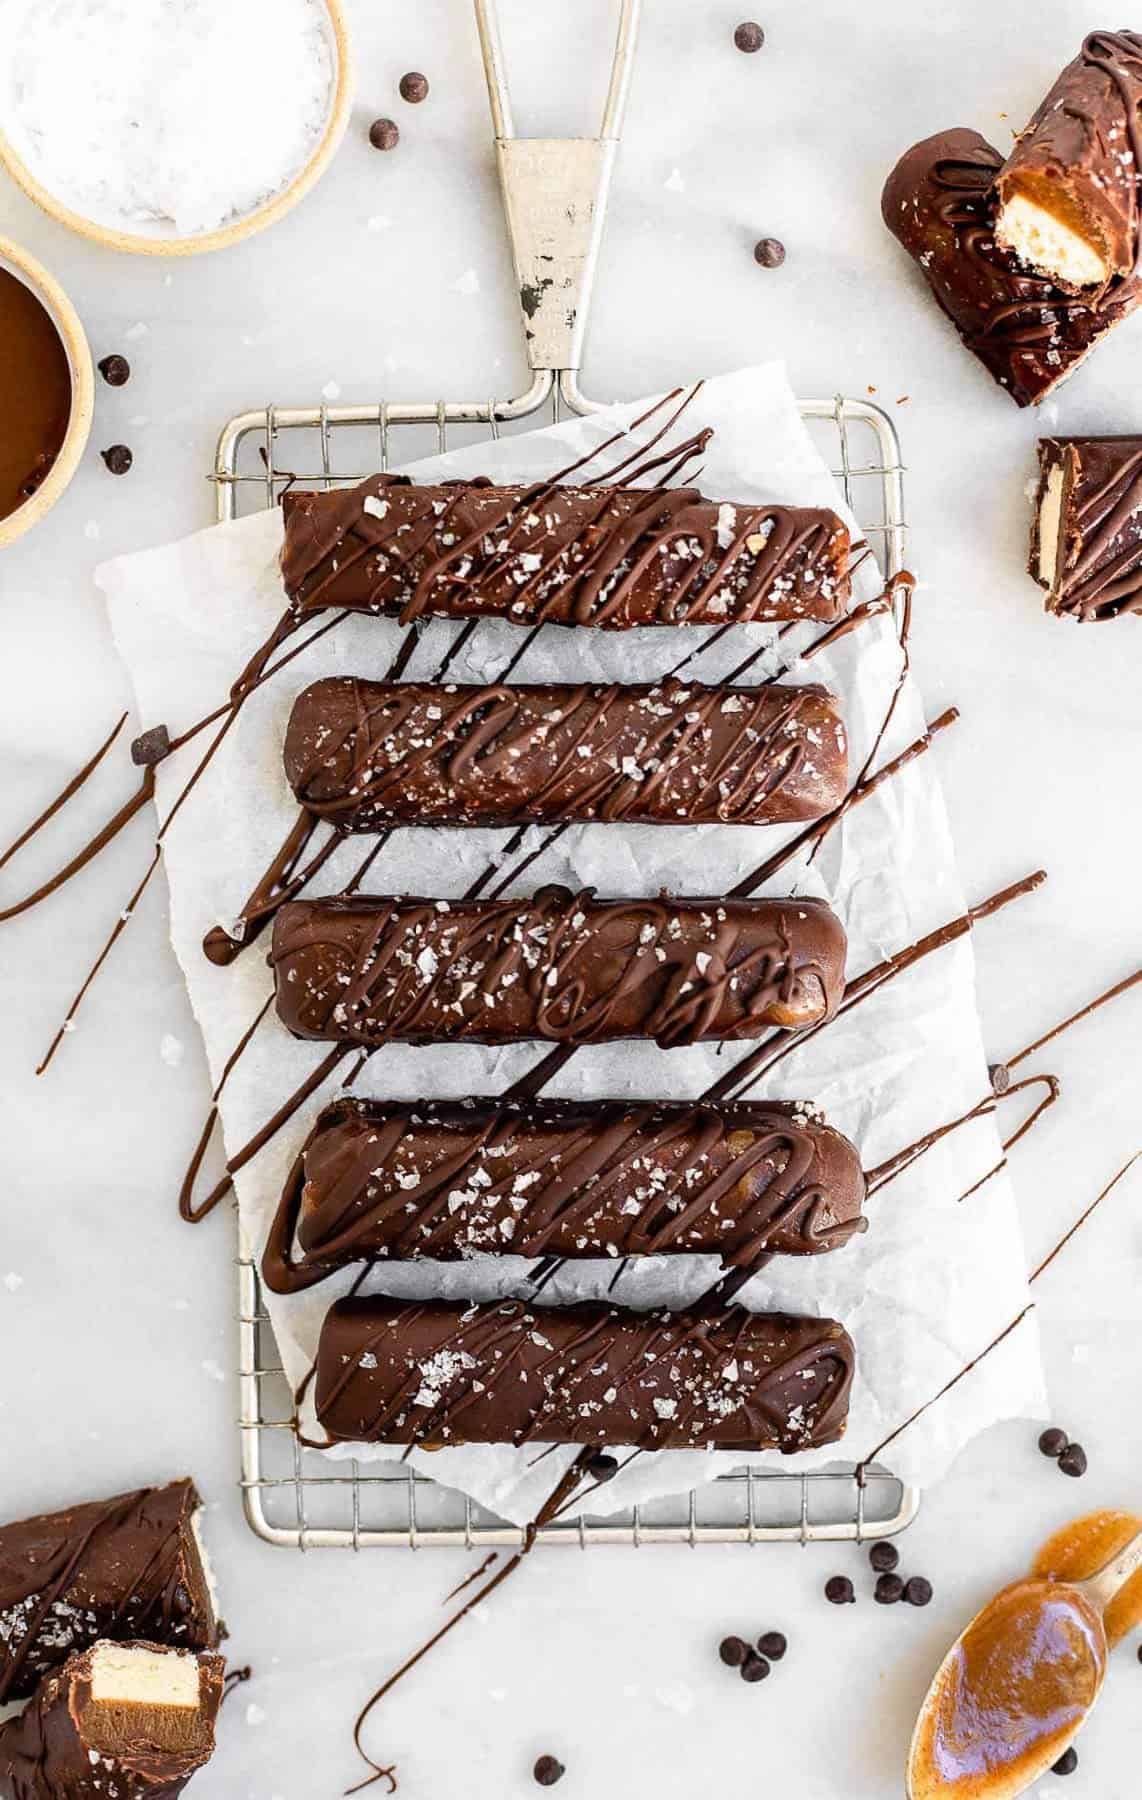 Final twix bars with chocolate drizzled on top.